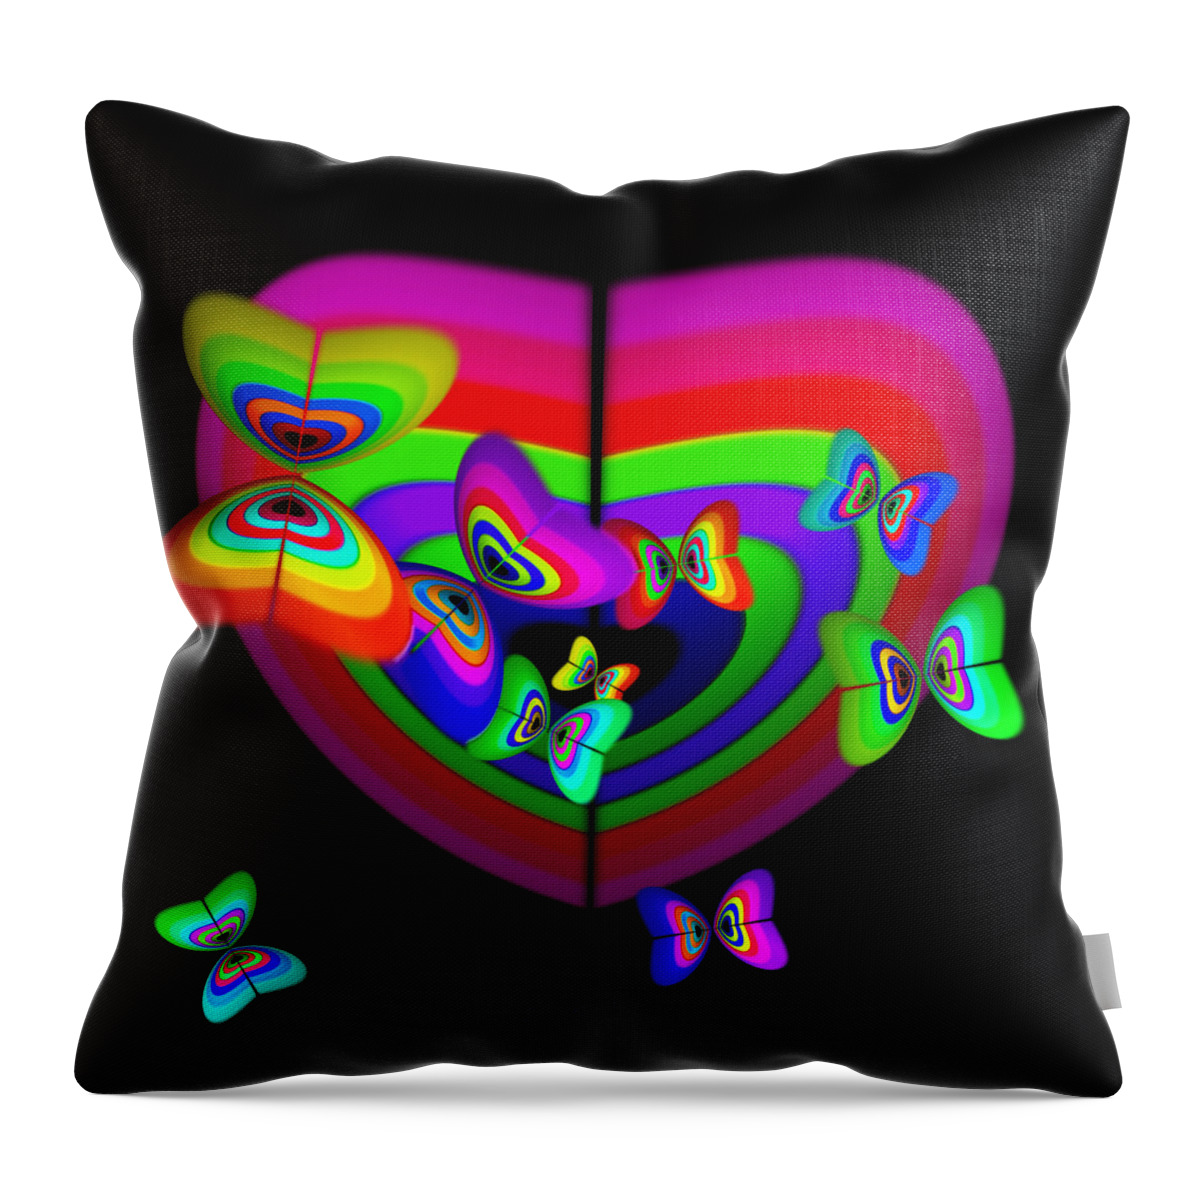  Throw Pillow featuring the digital art Anticipation by Charles Stuart